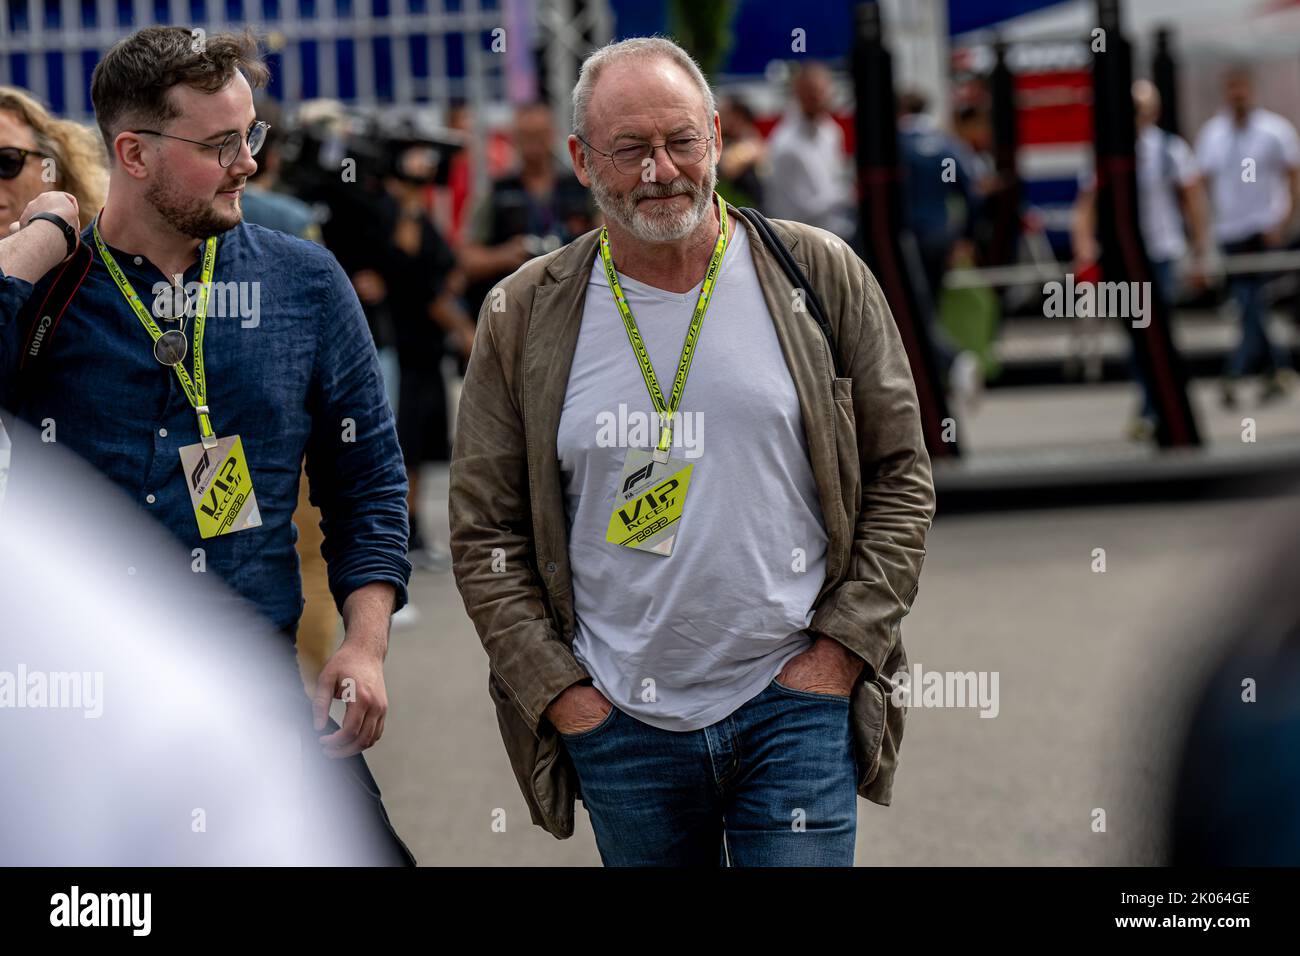 Monza, Italy, 09th Sep 2022, Jean Reno attending practice, round 16 of the 2022 Formula 1 championship. Credit: Michael Potts/Alamy Live News Stock Photo